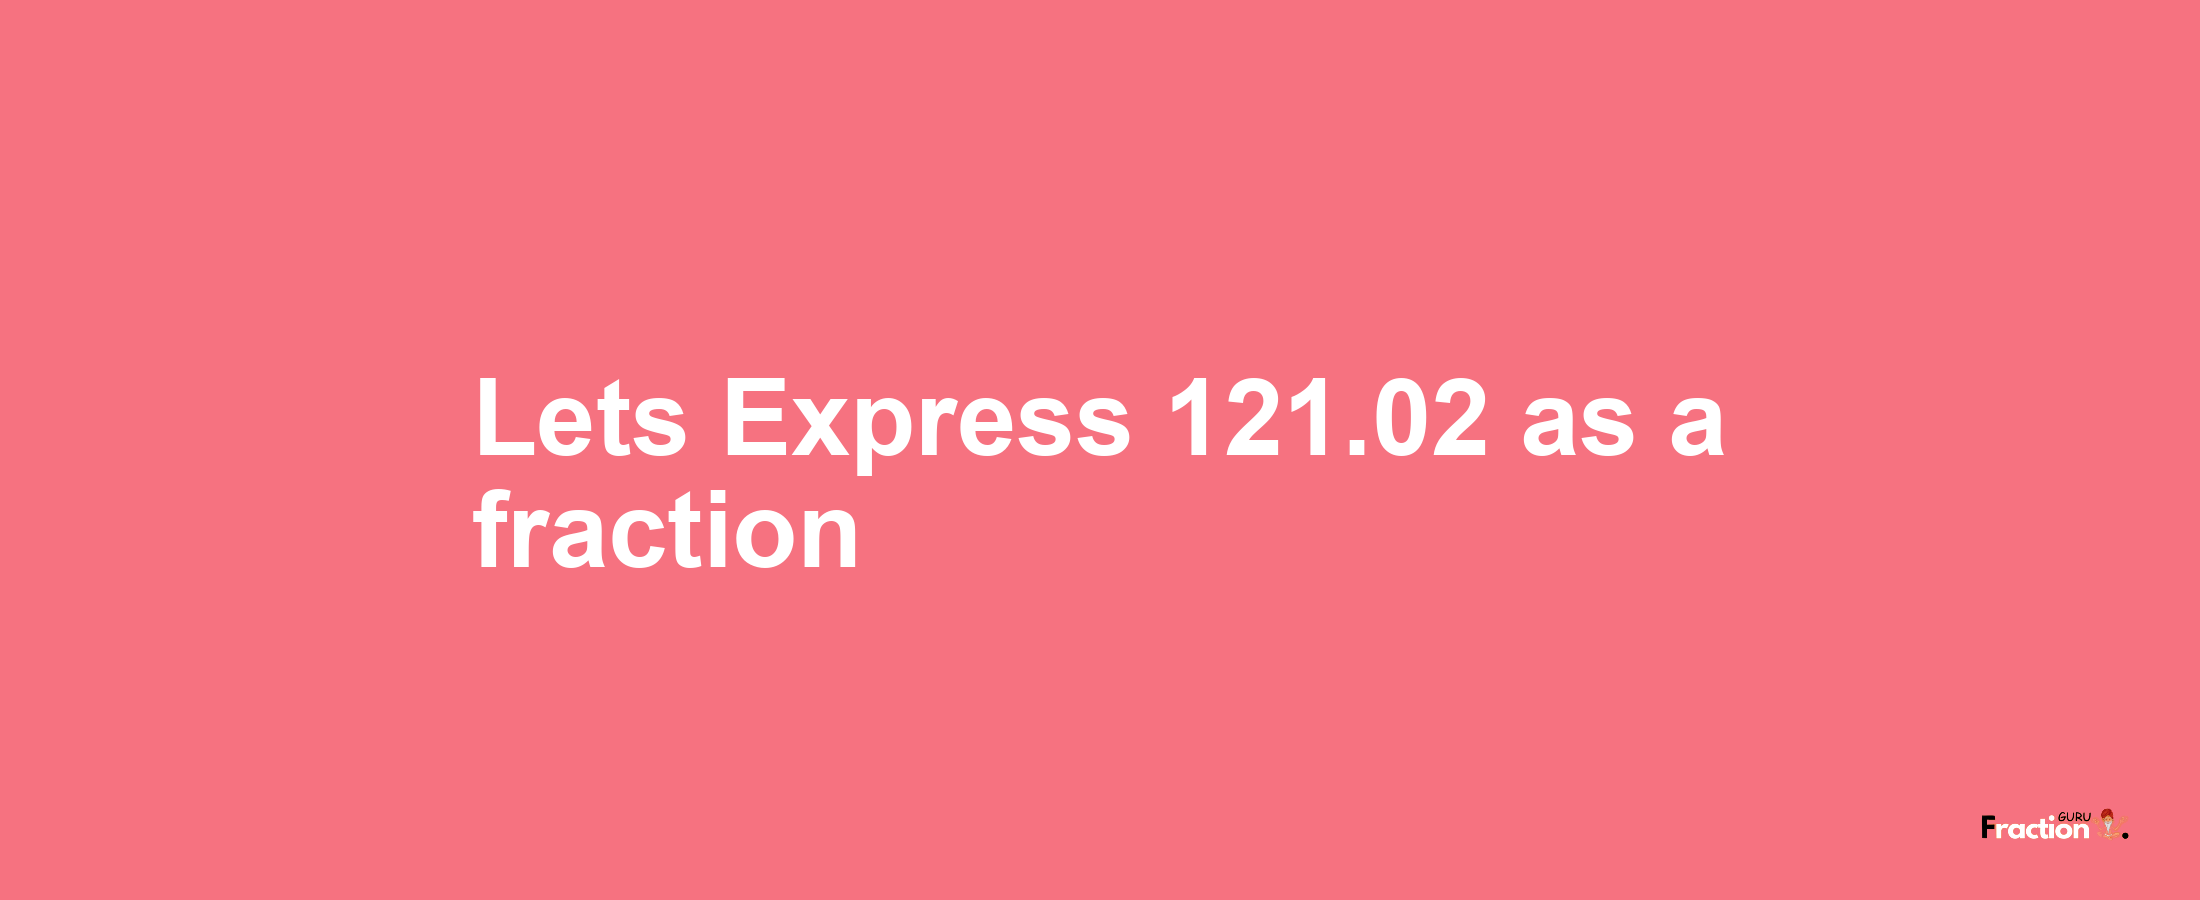 Lets Express 121.02 as afraction